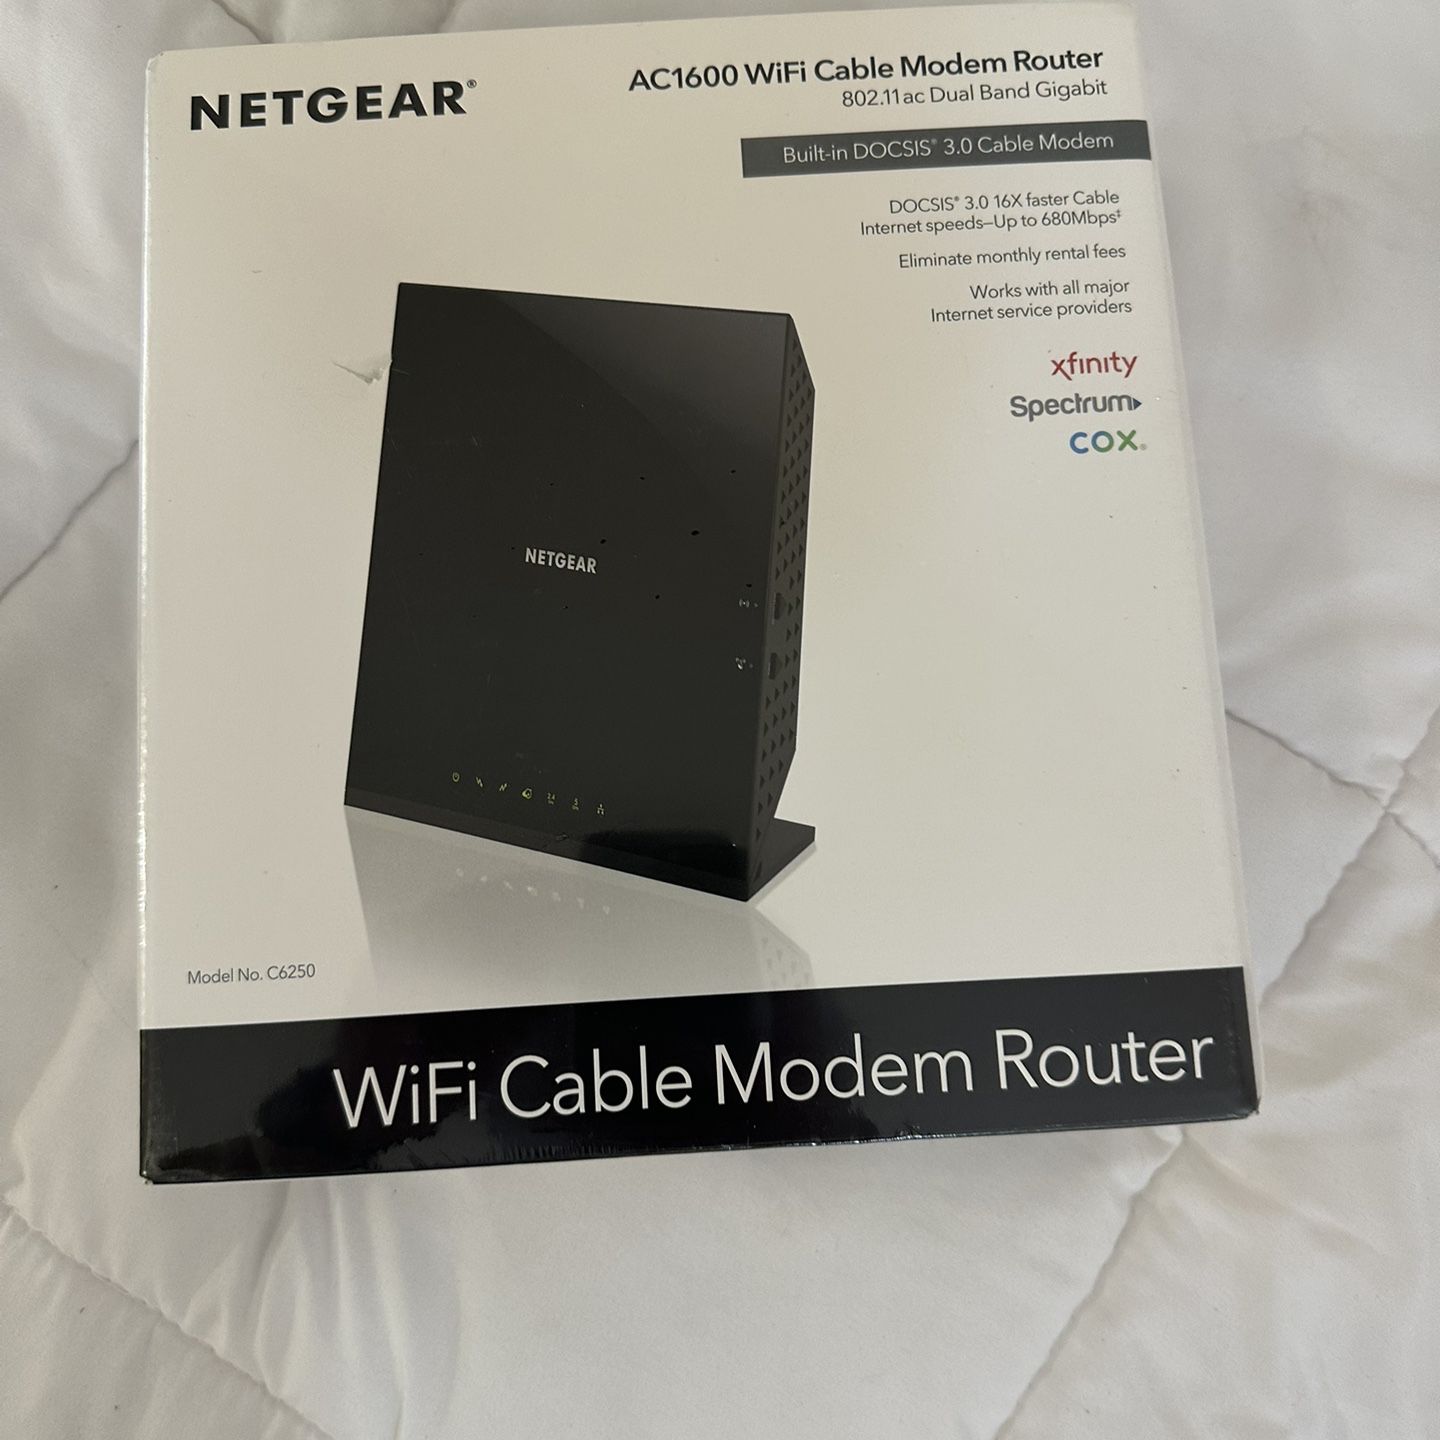 Cable Modem router *Brand new, In wrapper*